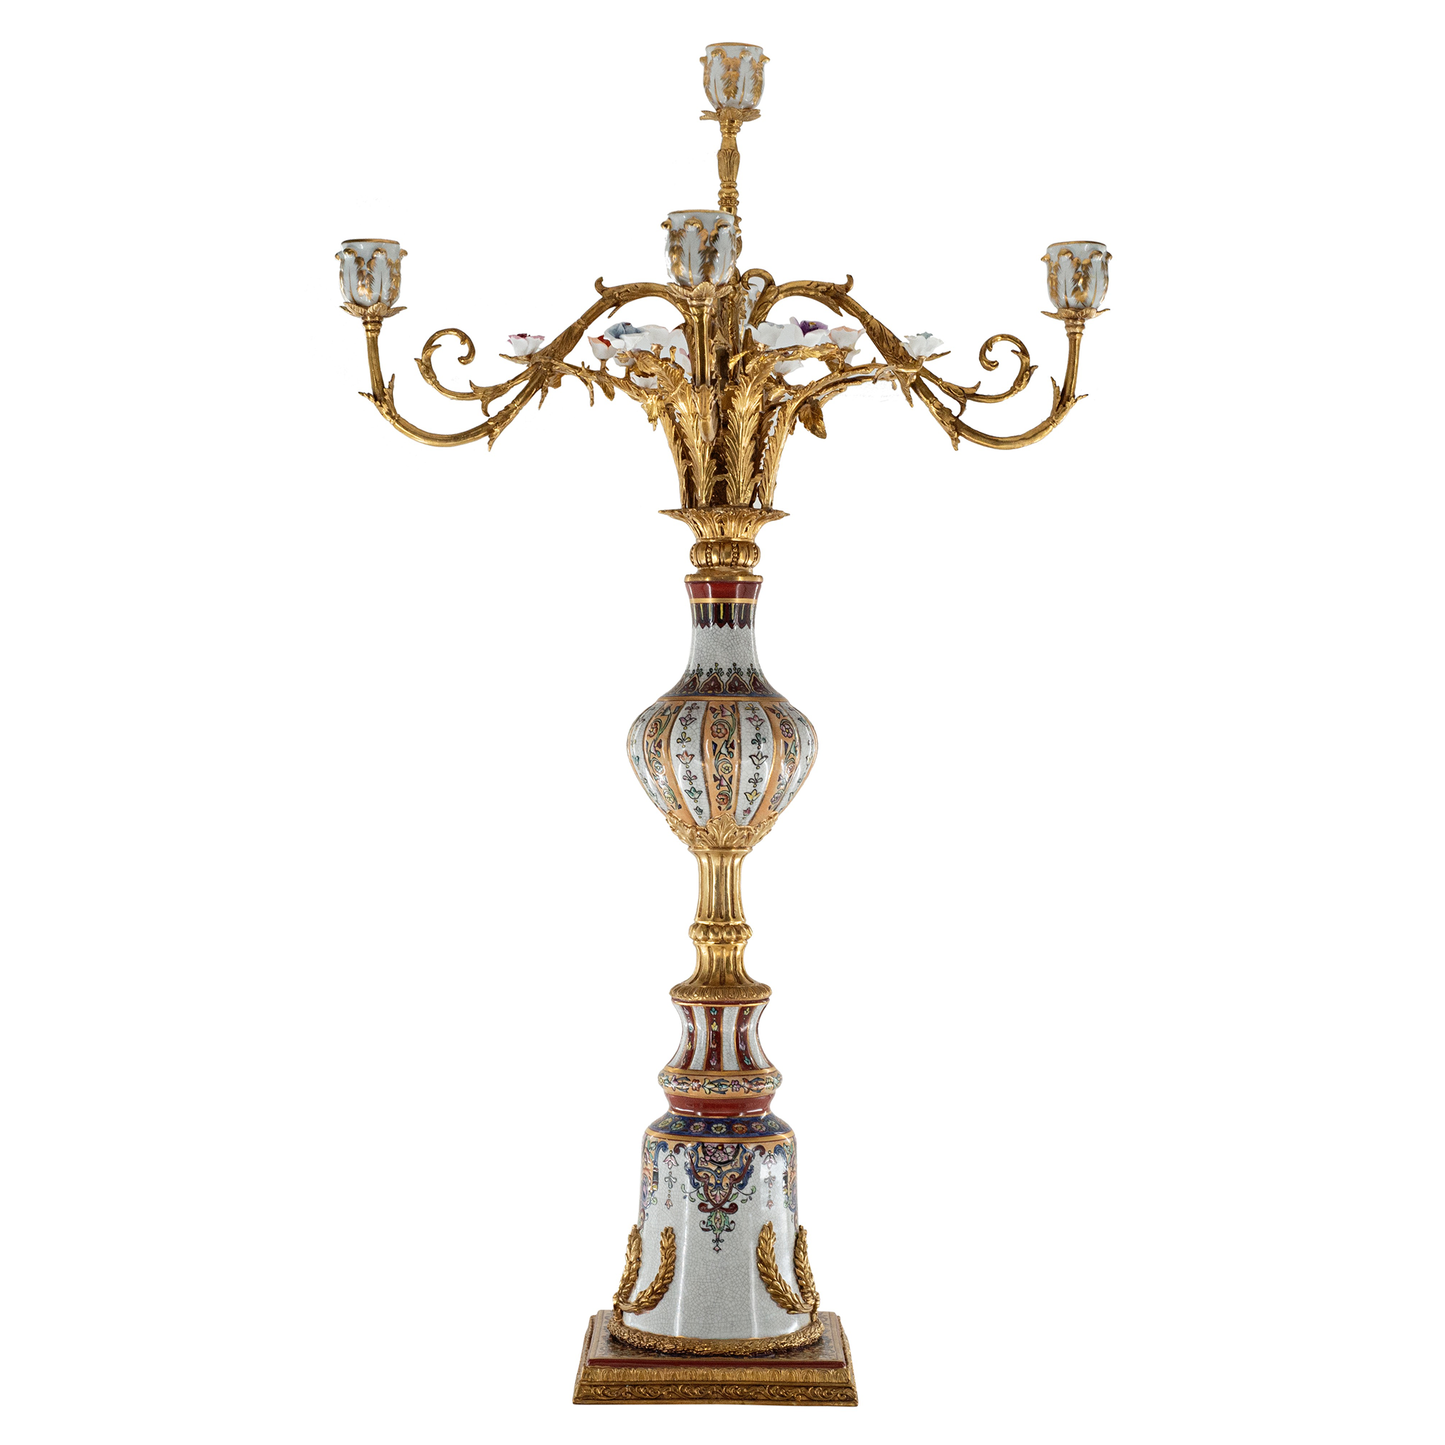 Hand-Painted Bronze & Porcelain Five Cup Candelabra